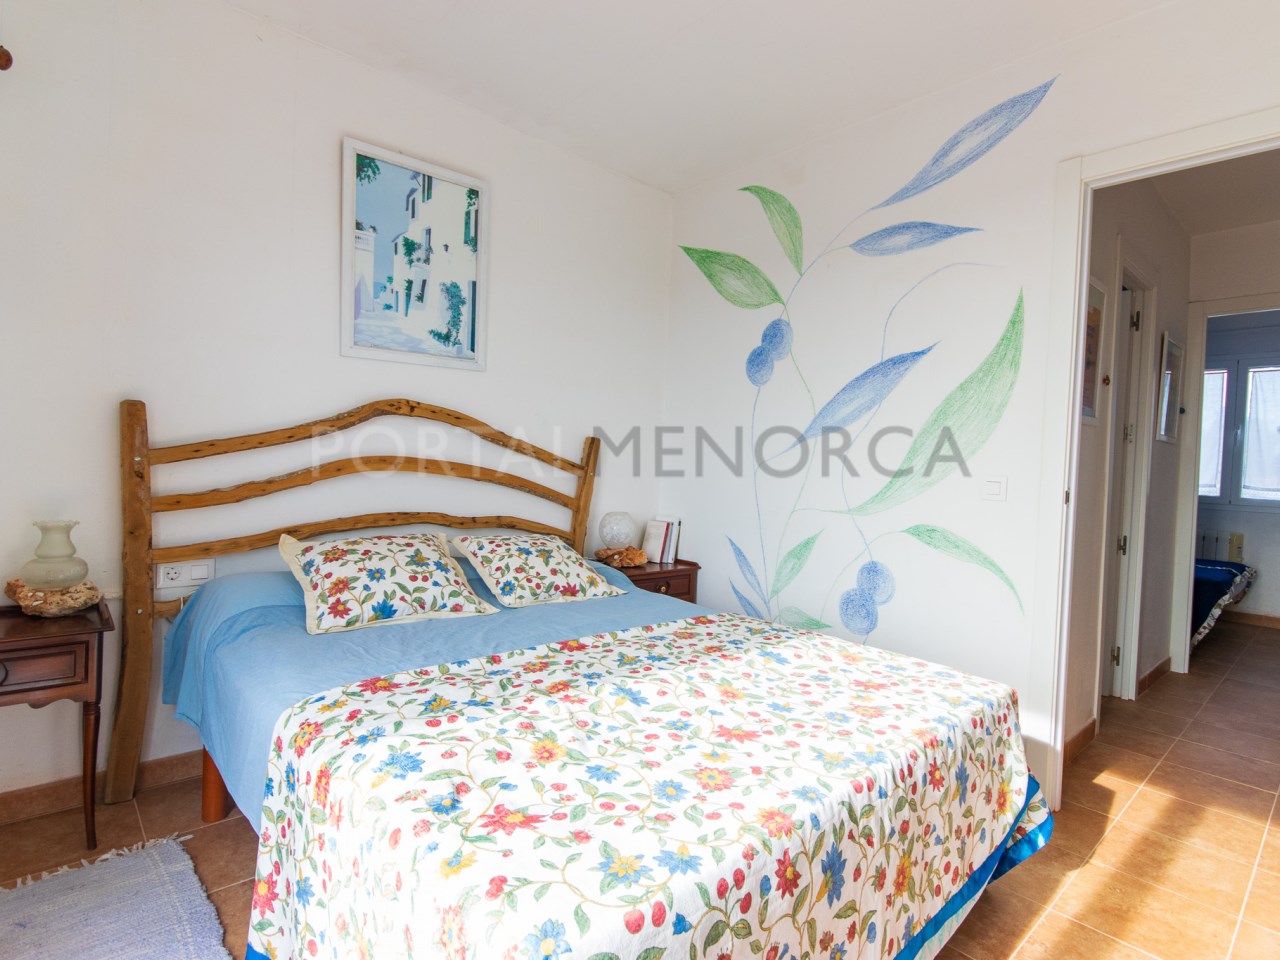 Master bedroom of two bedroom townhouse for sale in Cales Coves